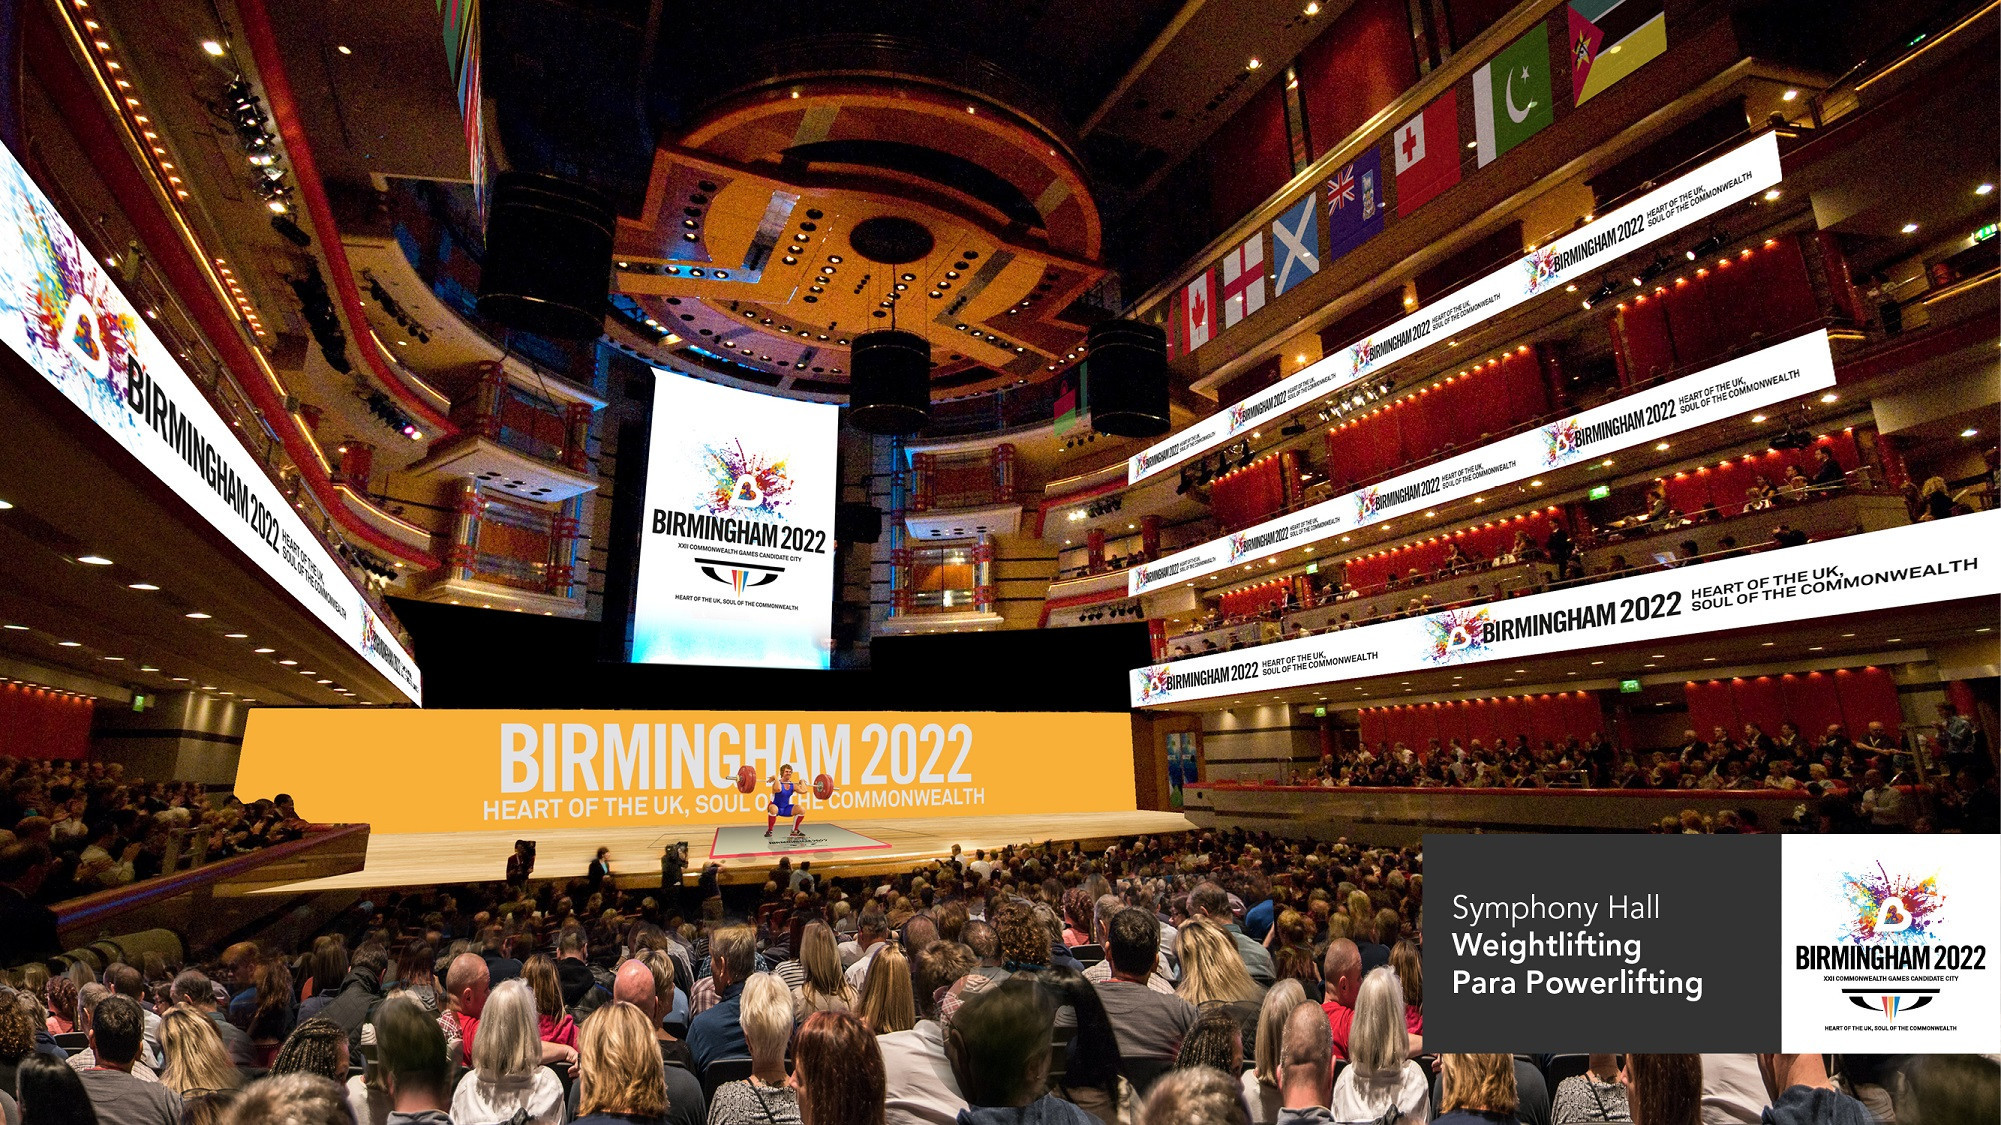 Birmingham will be officially announced as the host city of the 2022 Commonwealth Games ©Birmingham 2022